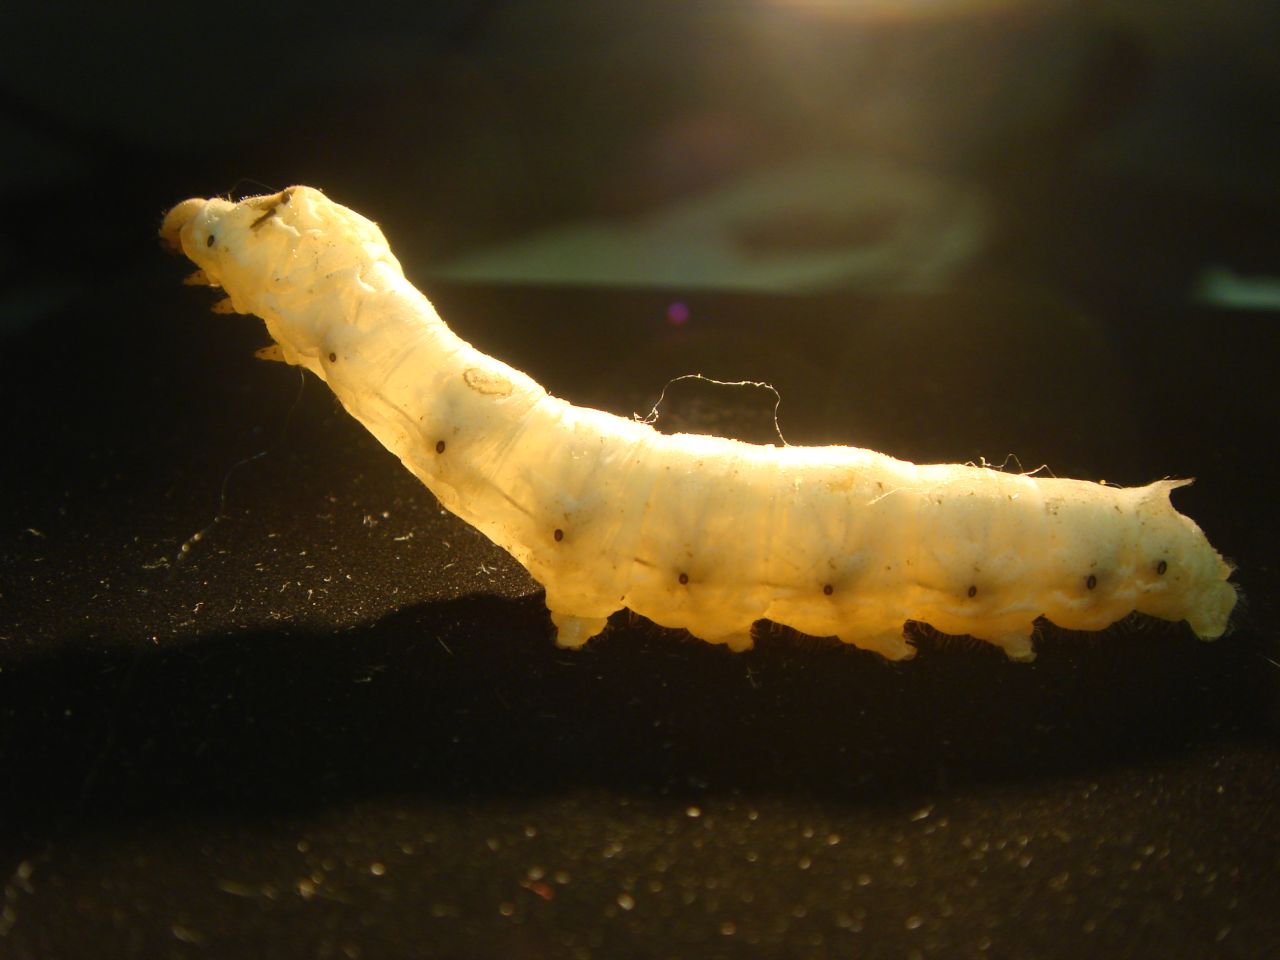 A mature silkworm immediately prior to it spinning its silk cocoon. At one time in history, the rarity of silk made it a highly prized material. It has been woven into textiles for thousands of years.